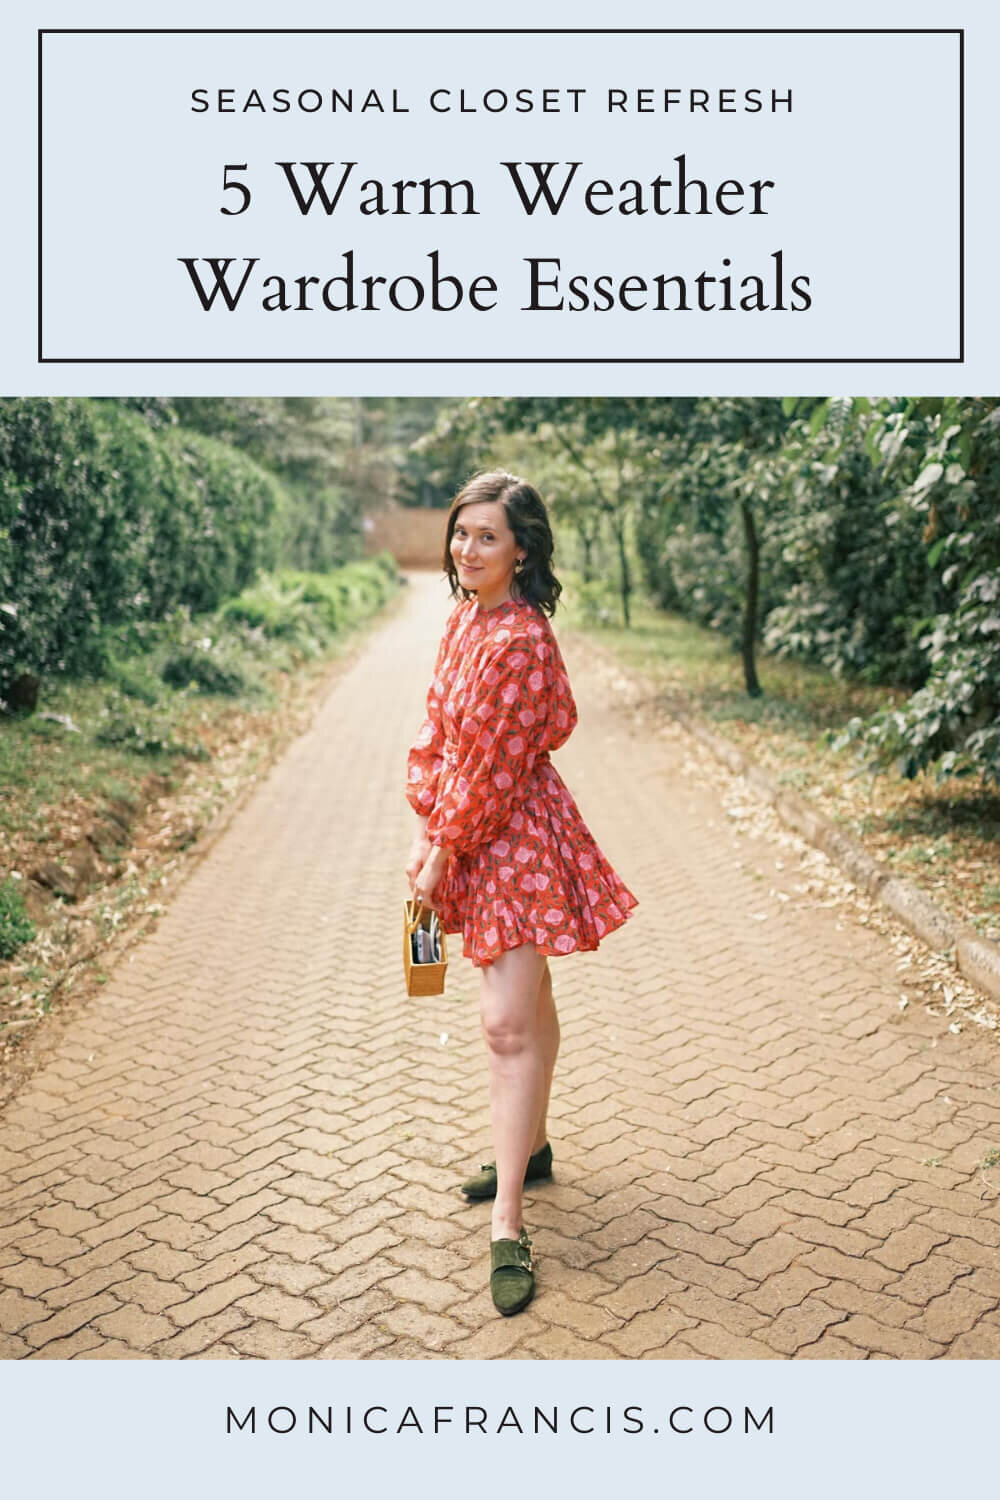 5 Wardrobe Essentials for a Warm Weather Closet Refresh | After a spring closet cleanout, even the best capsule wardrobe needs a refresh! These five wardrobe staples will help you create your new favorite warm weather outfits for an aesthetic spring…